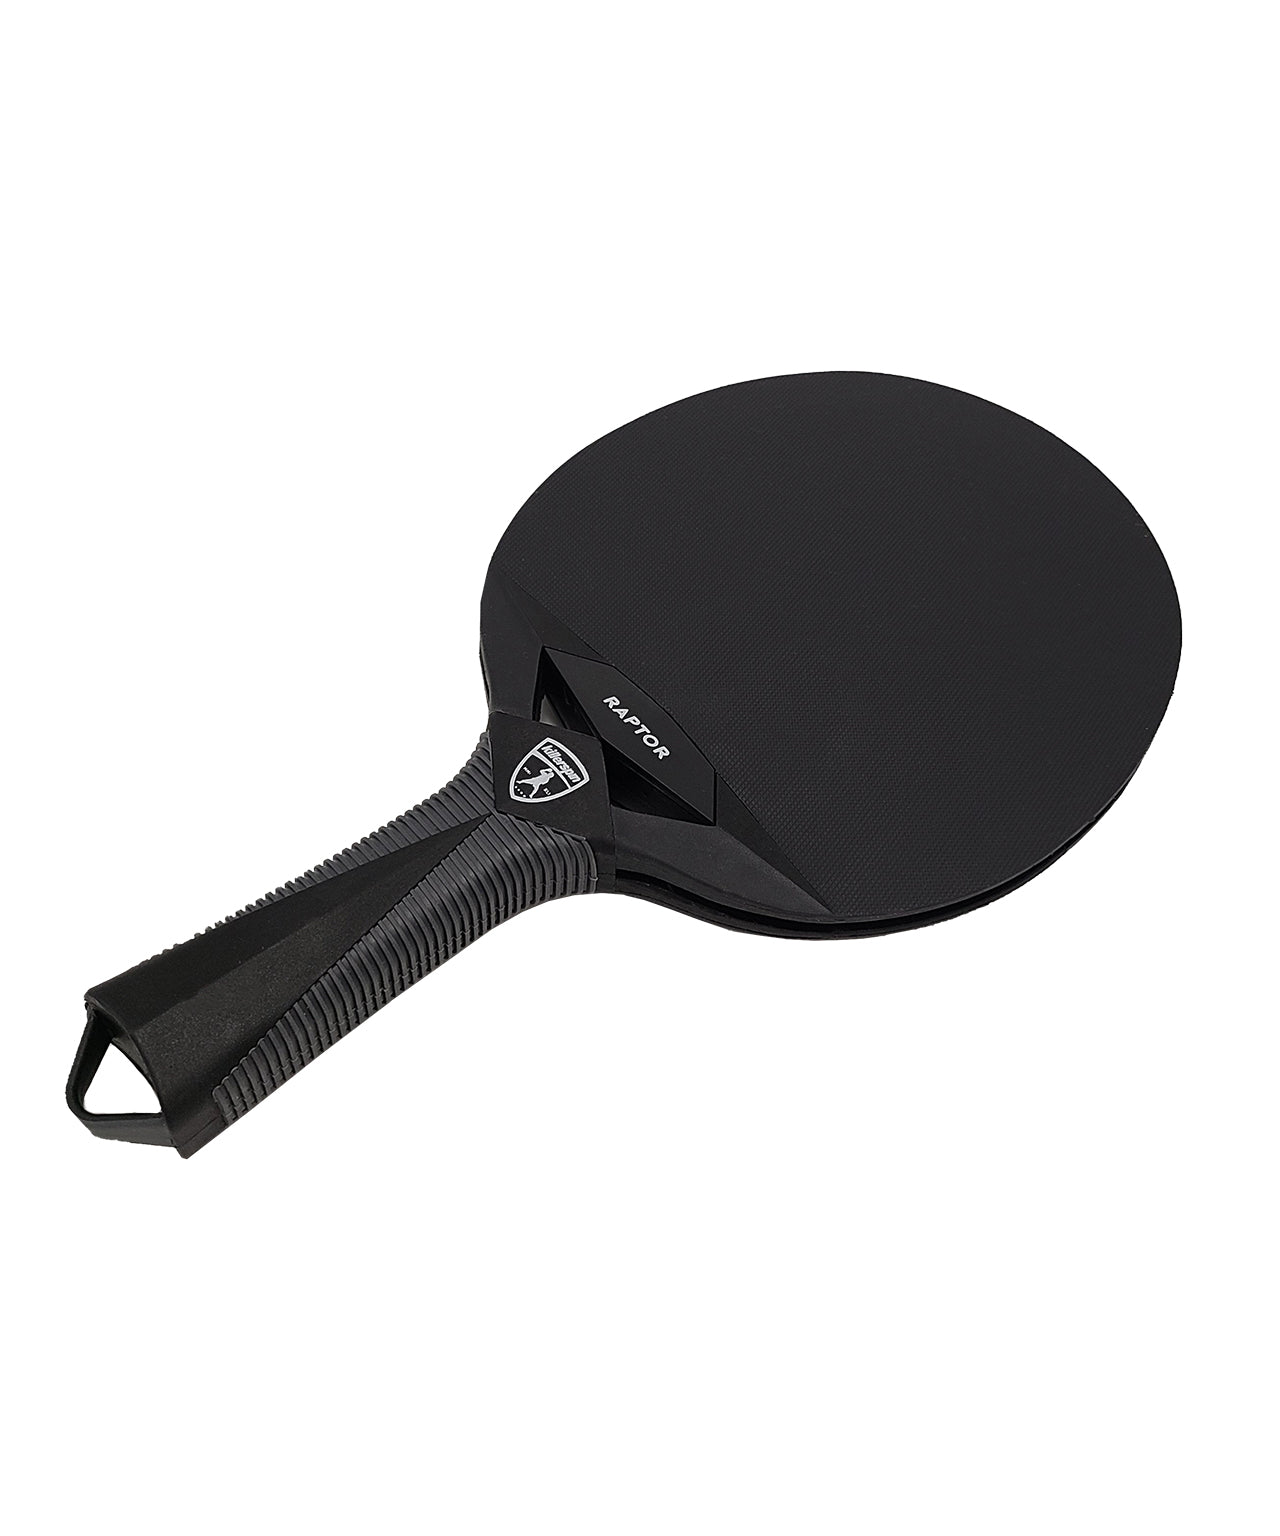 IMPACT Raptor Outdoor Paddle